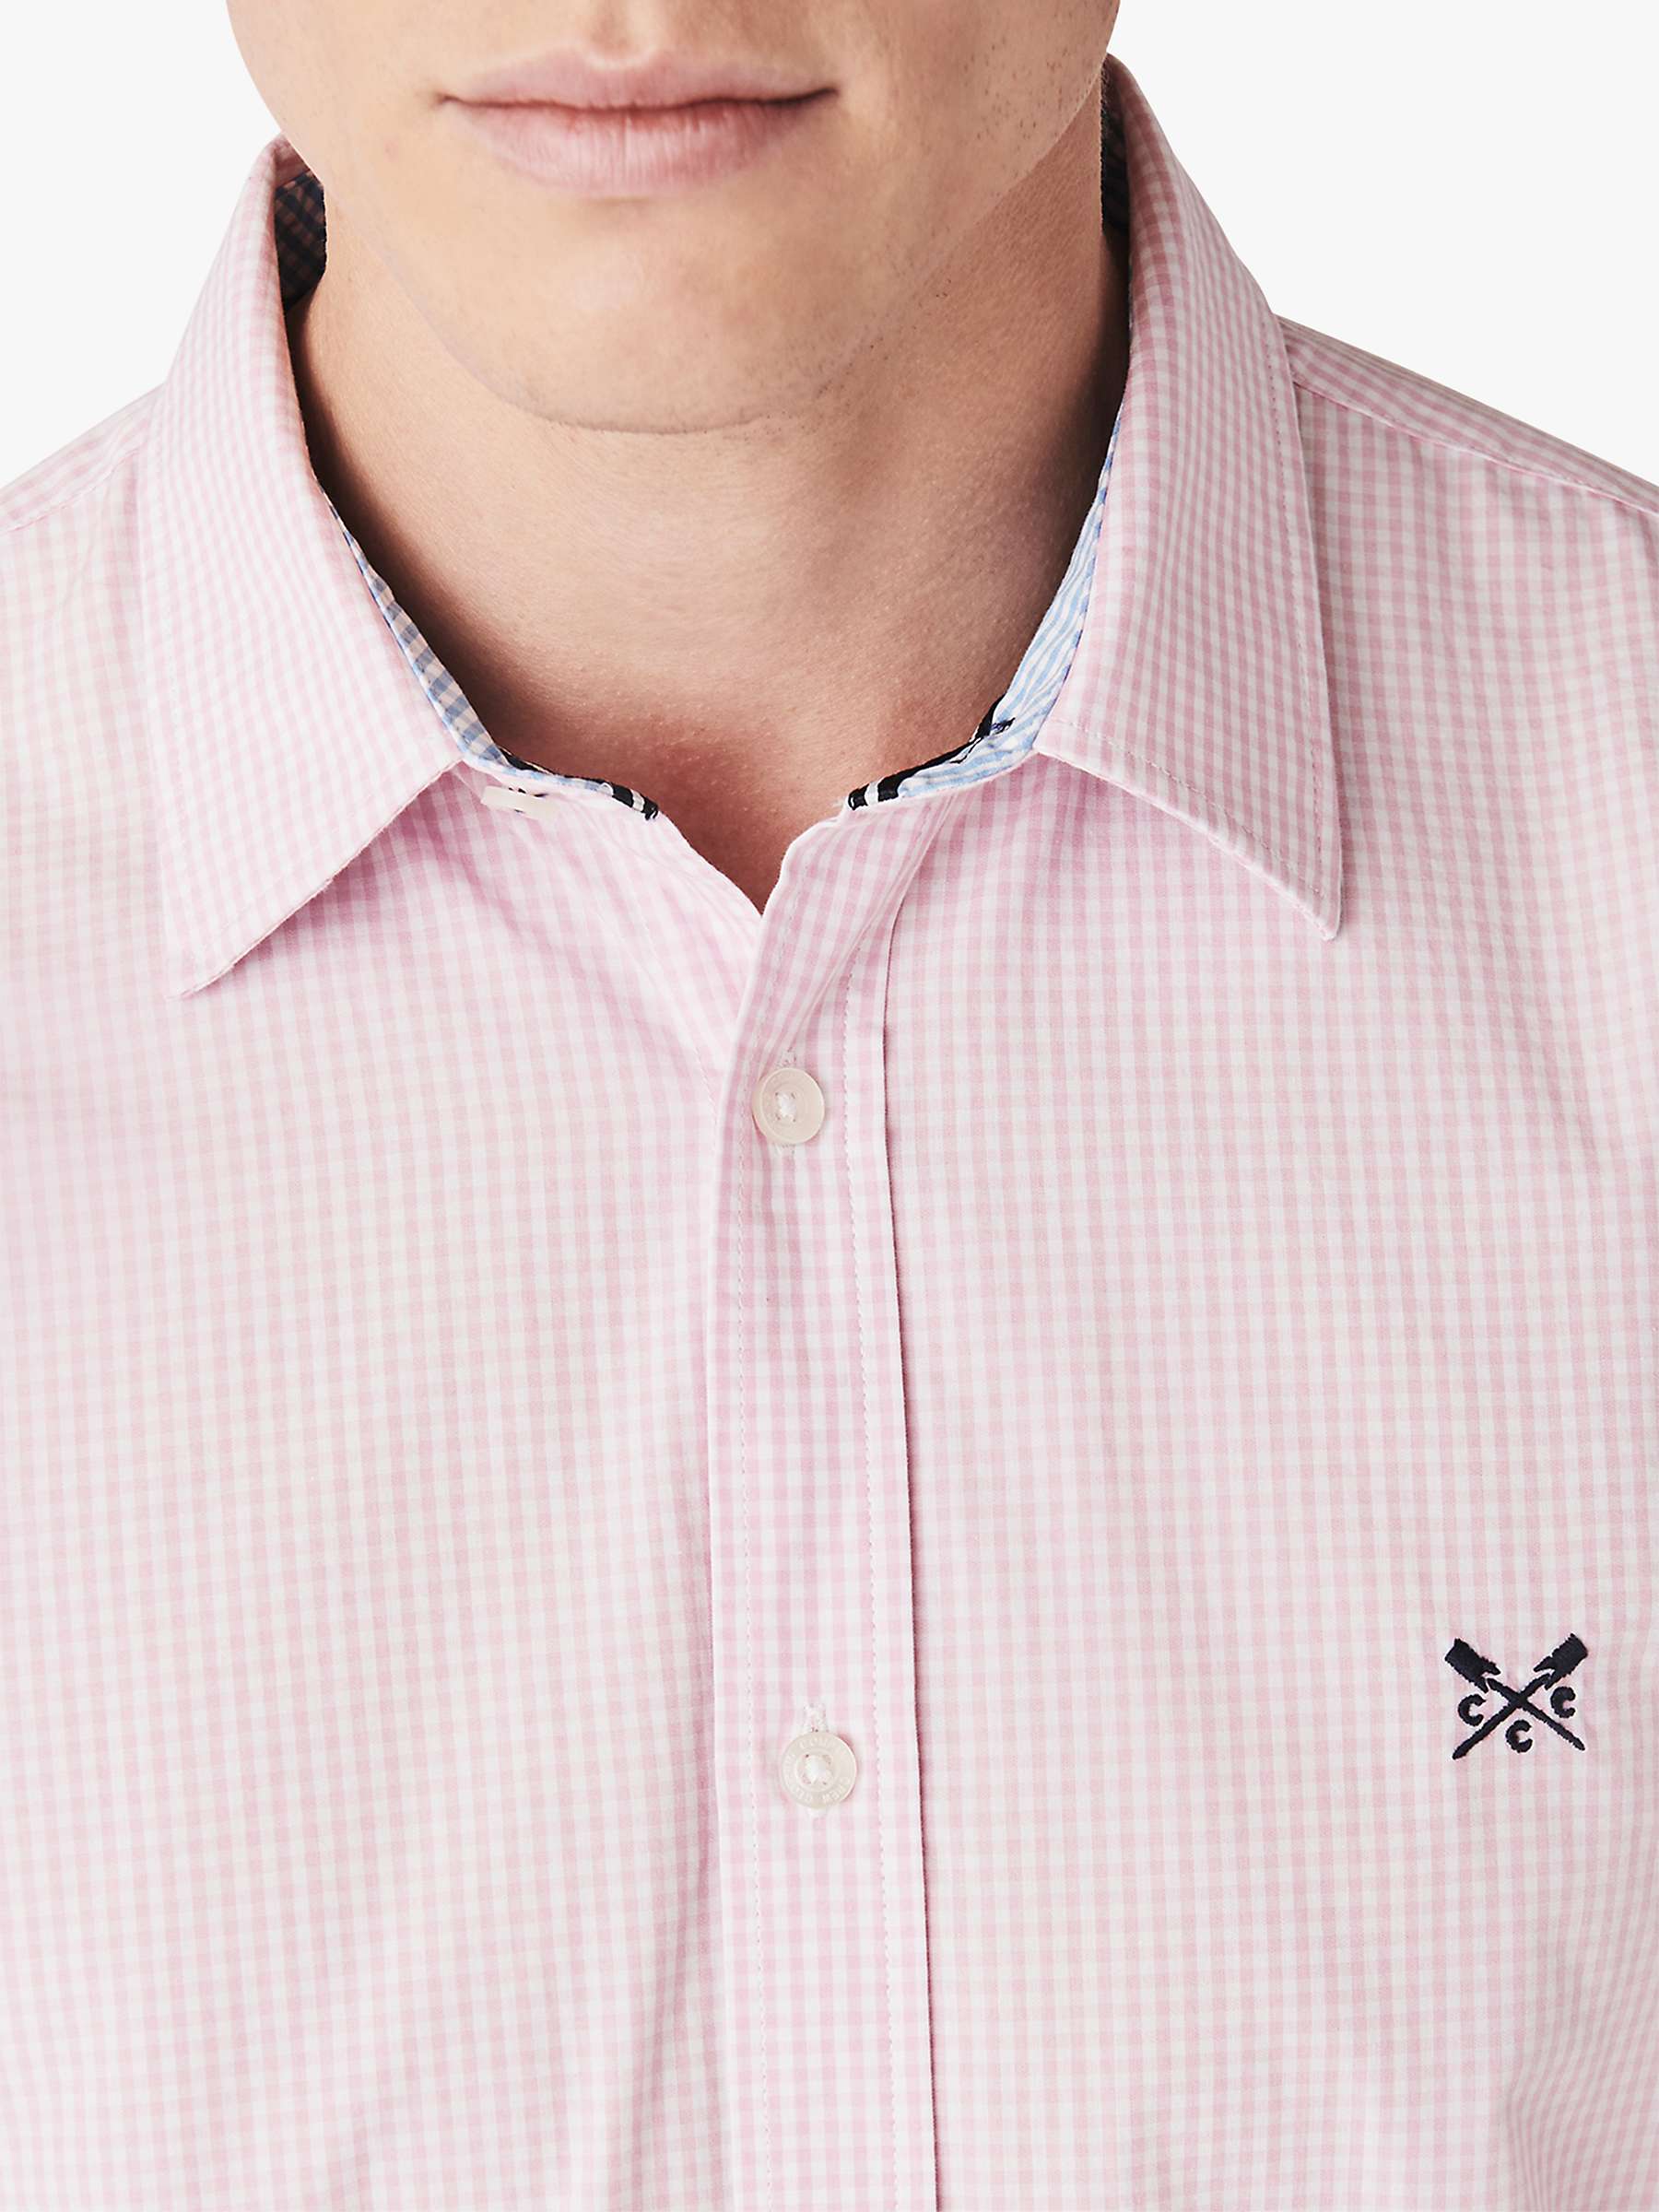 Buy Crew Clothing Classic Micro Gingham Check Shirt Online at johnlewis.com